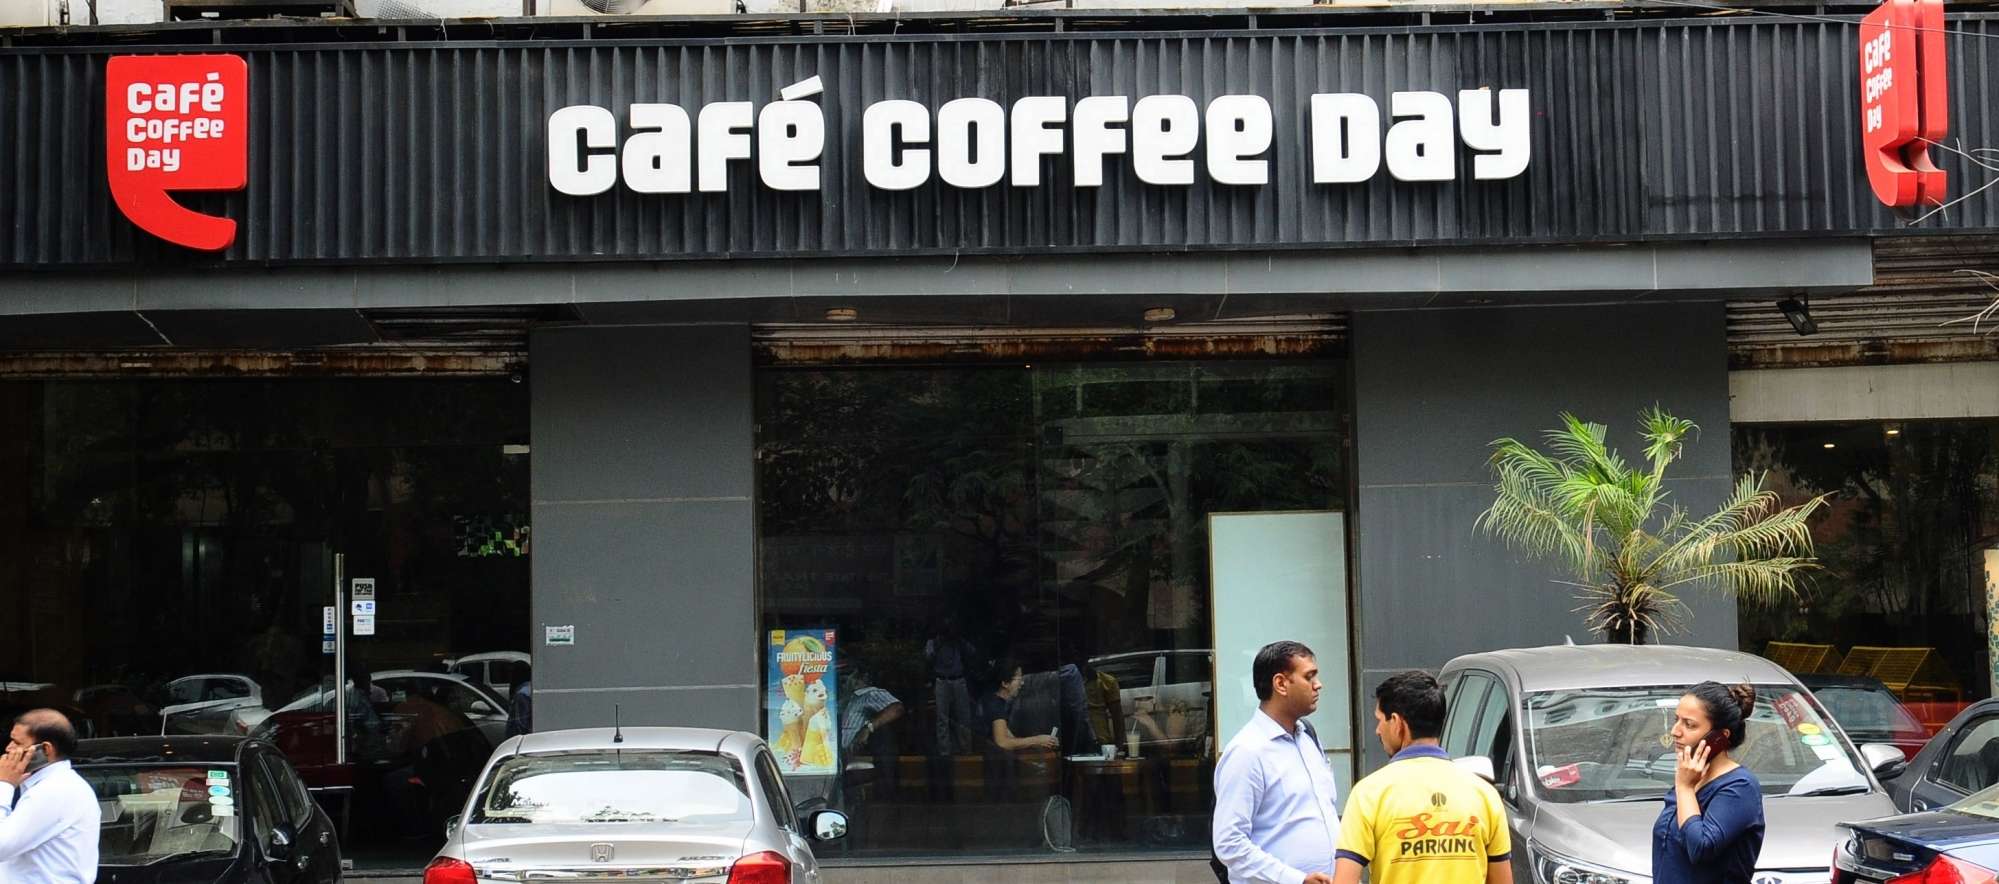 Shares Price of Coffee Day Enterprise slipped by a massive 19.9% in early  trade